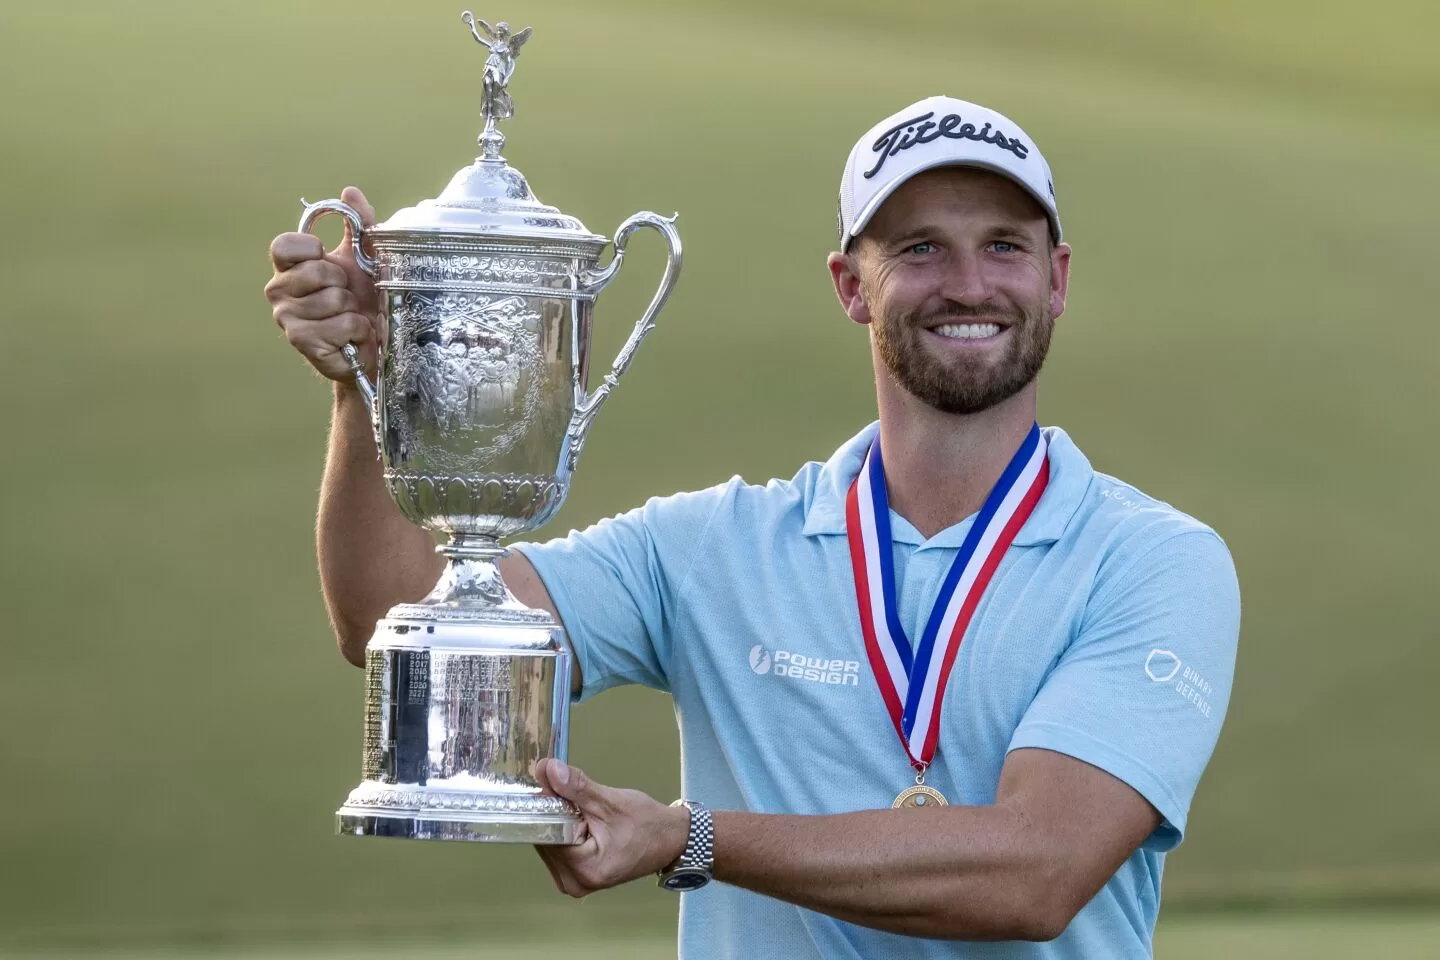 Top 10 fun facts about the U.S. Open champion 2023 – Wyndham Clark